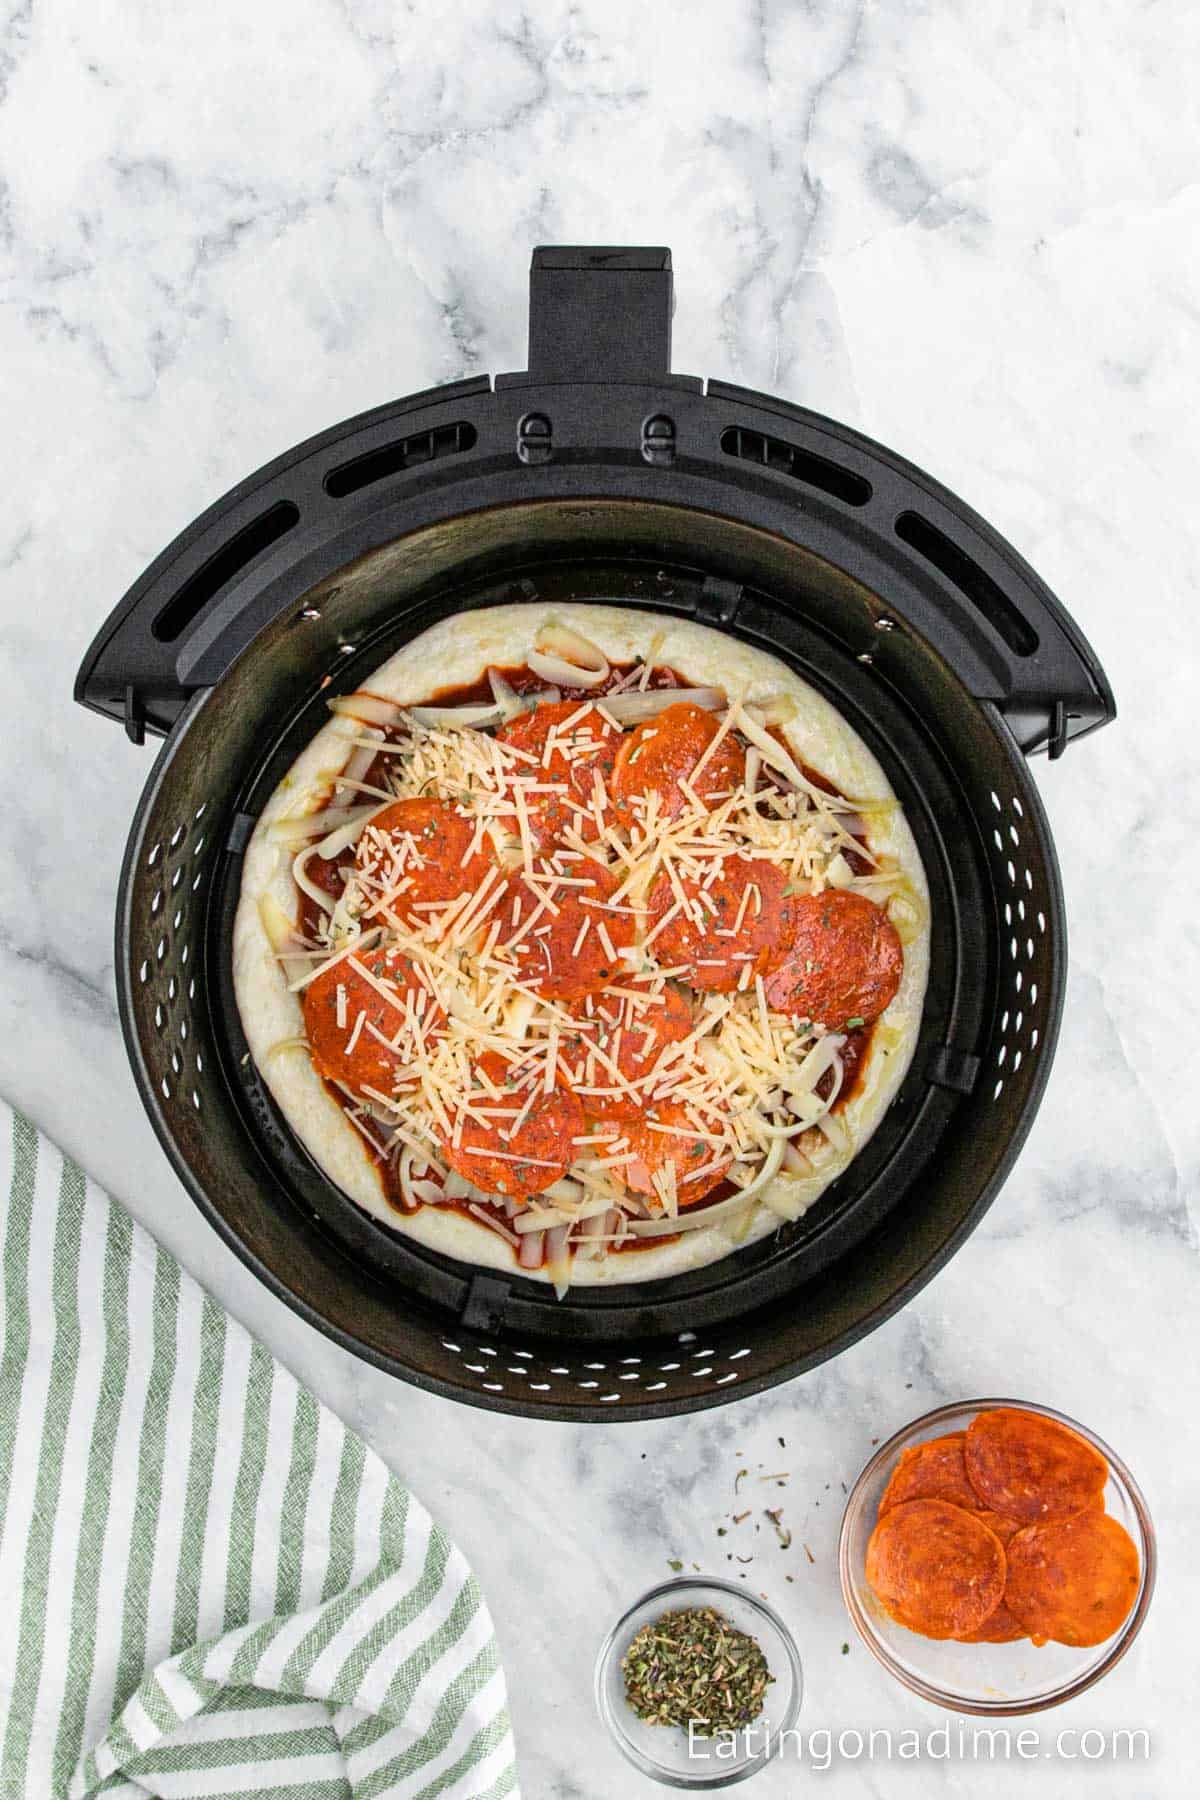 Top the pizza sauce with the shredded cheese and pepperoni